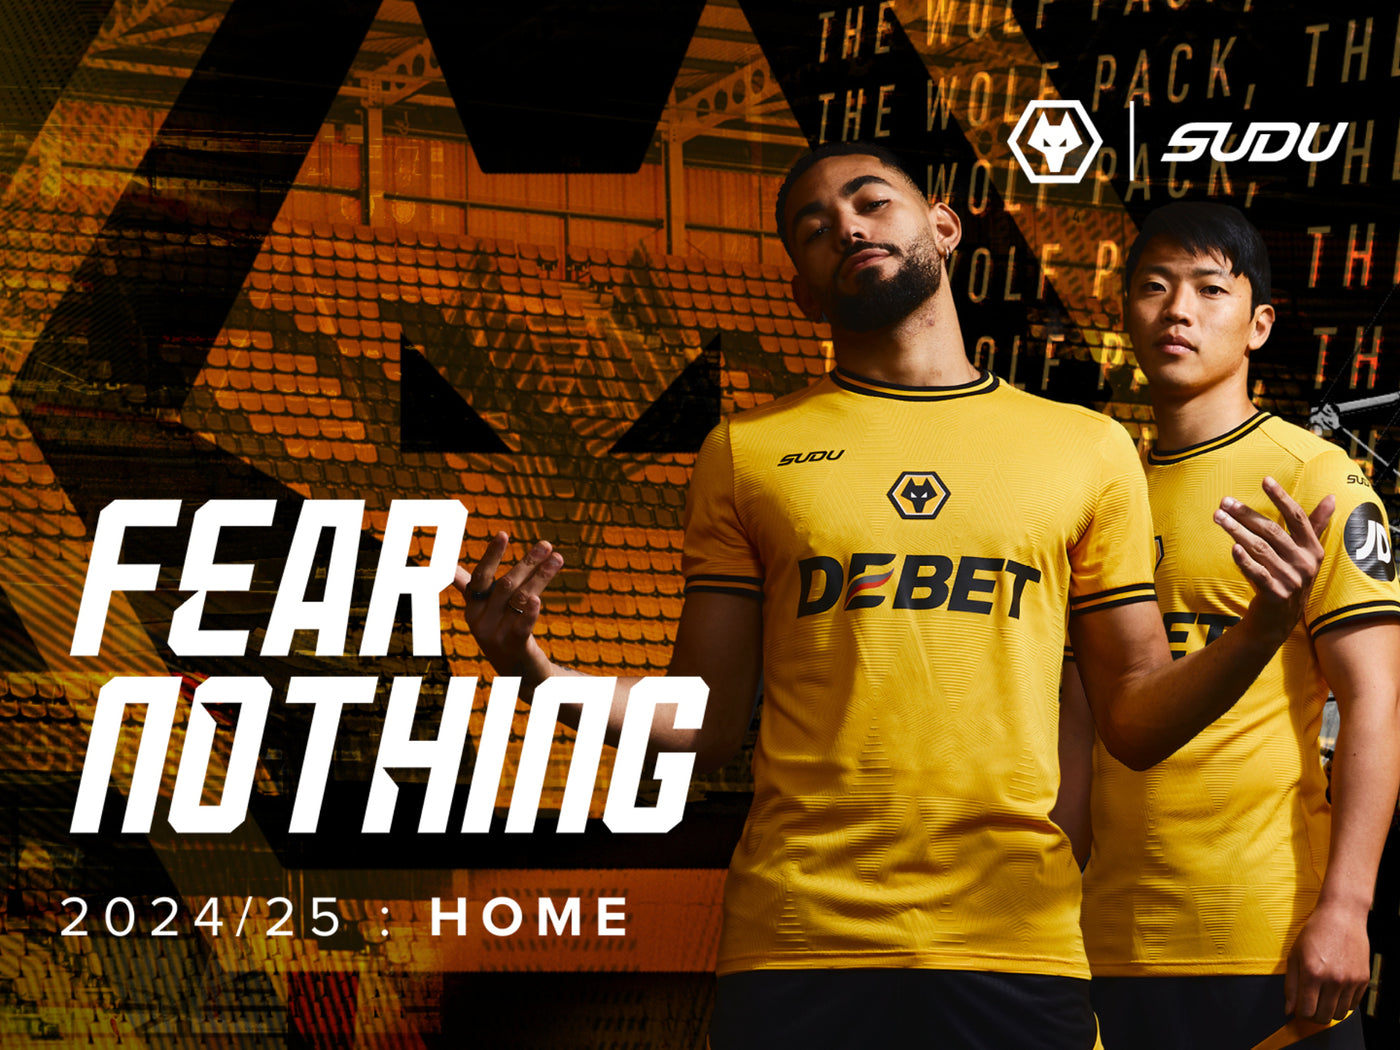 Fear Nothing: Introducing the 2024/25 Wolves Home Kit by SUDU